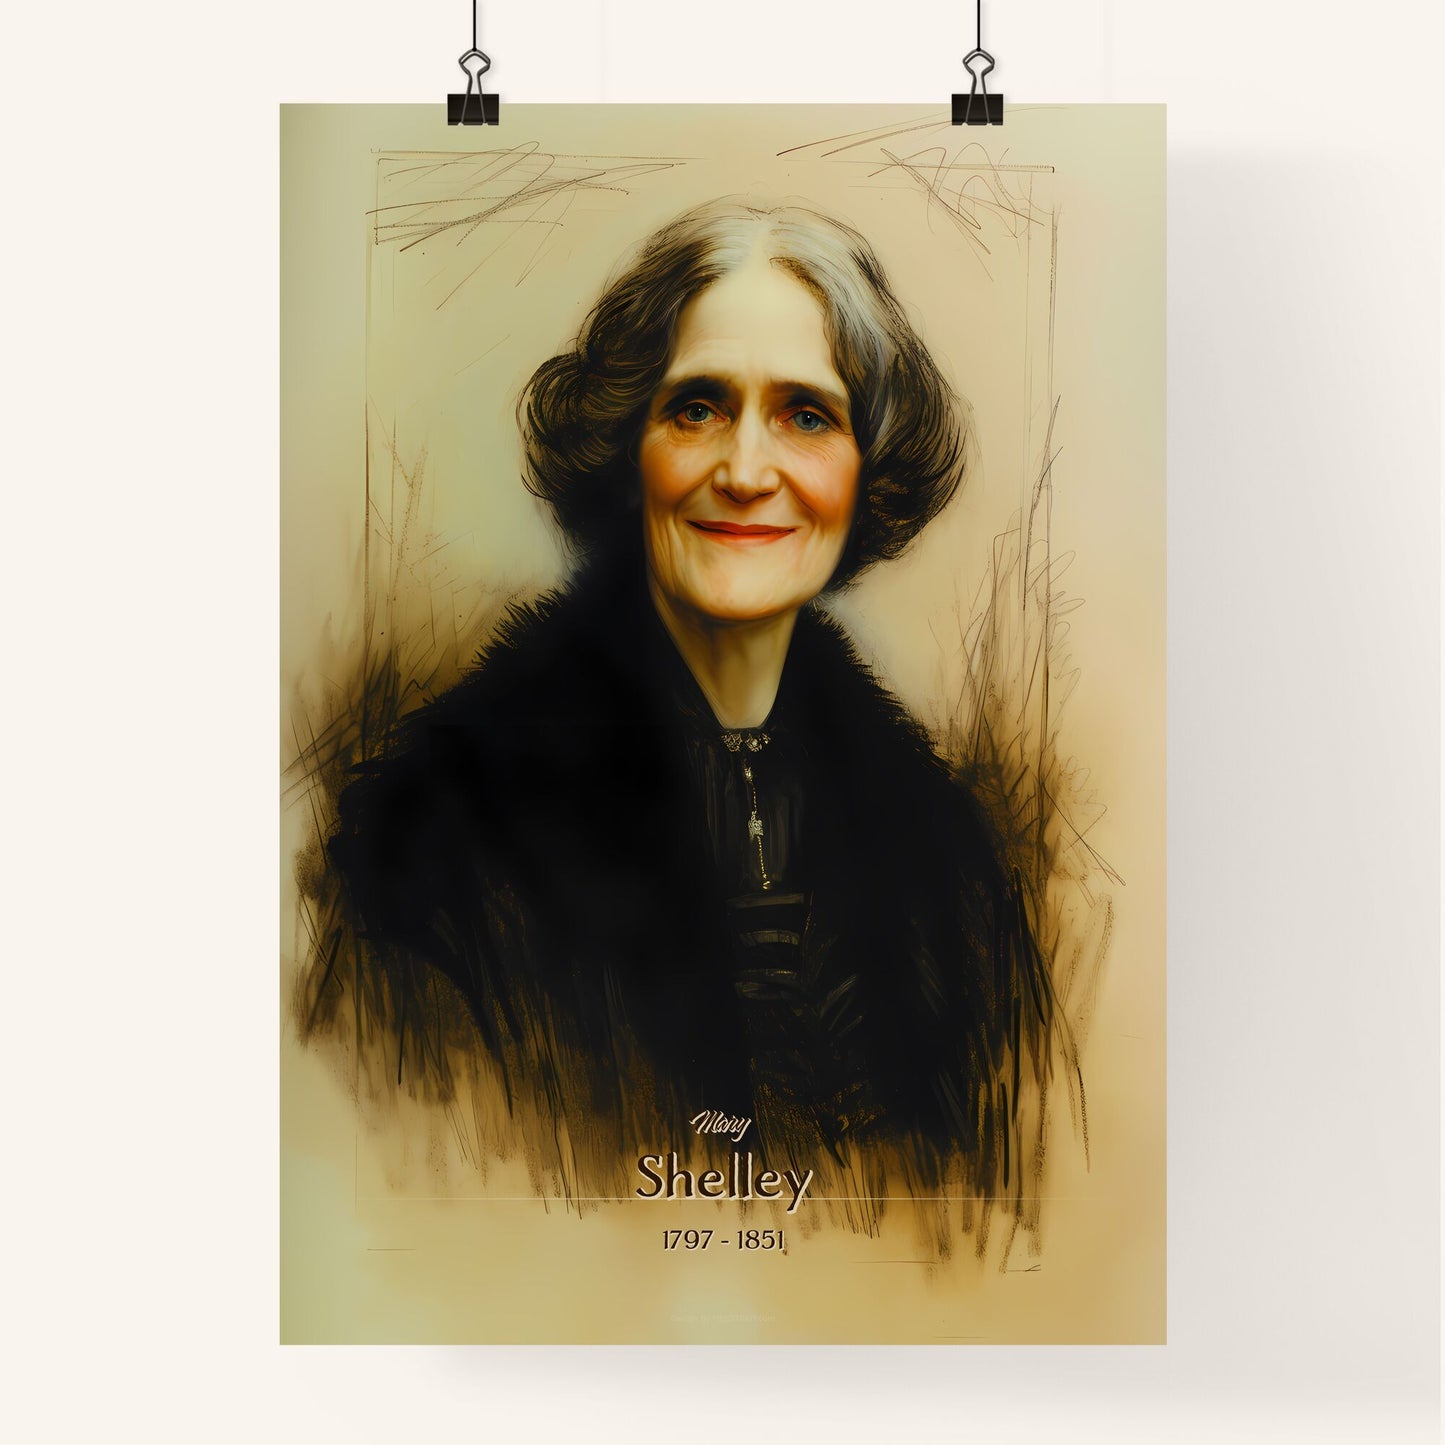 Mary, Shelley, 1797 - 1851, A Poster of a woman smiling at the camera Default Title